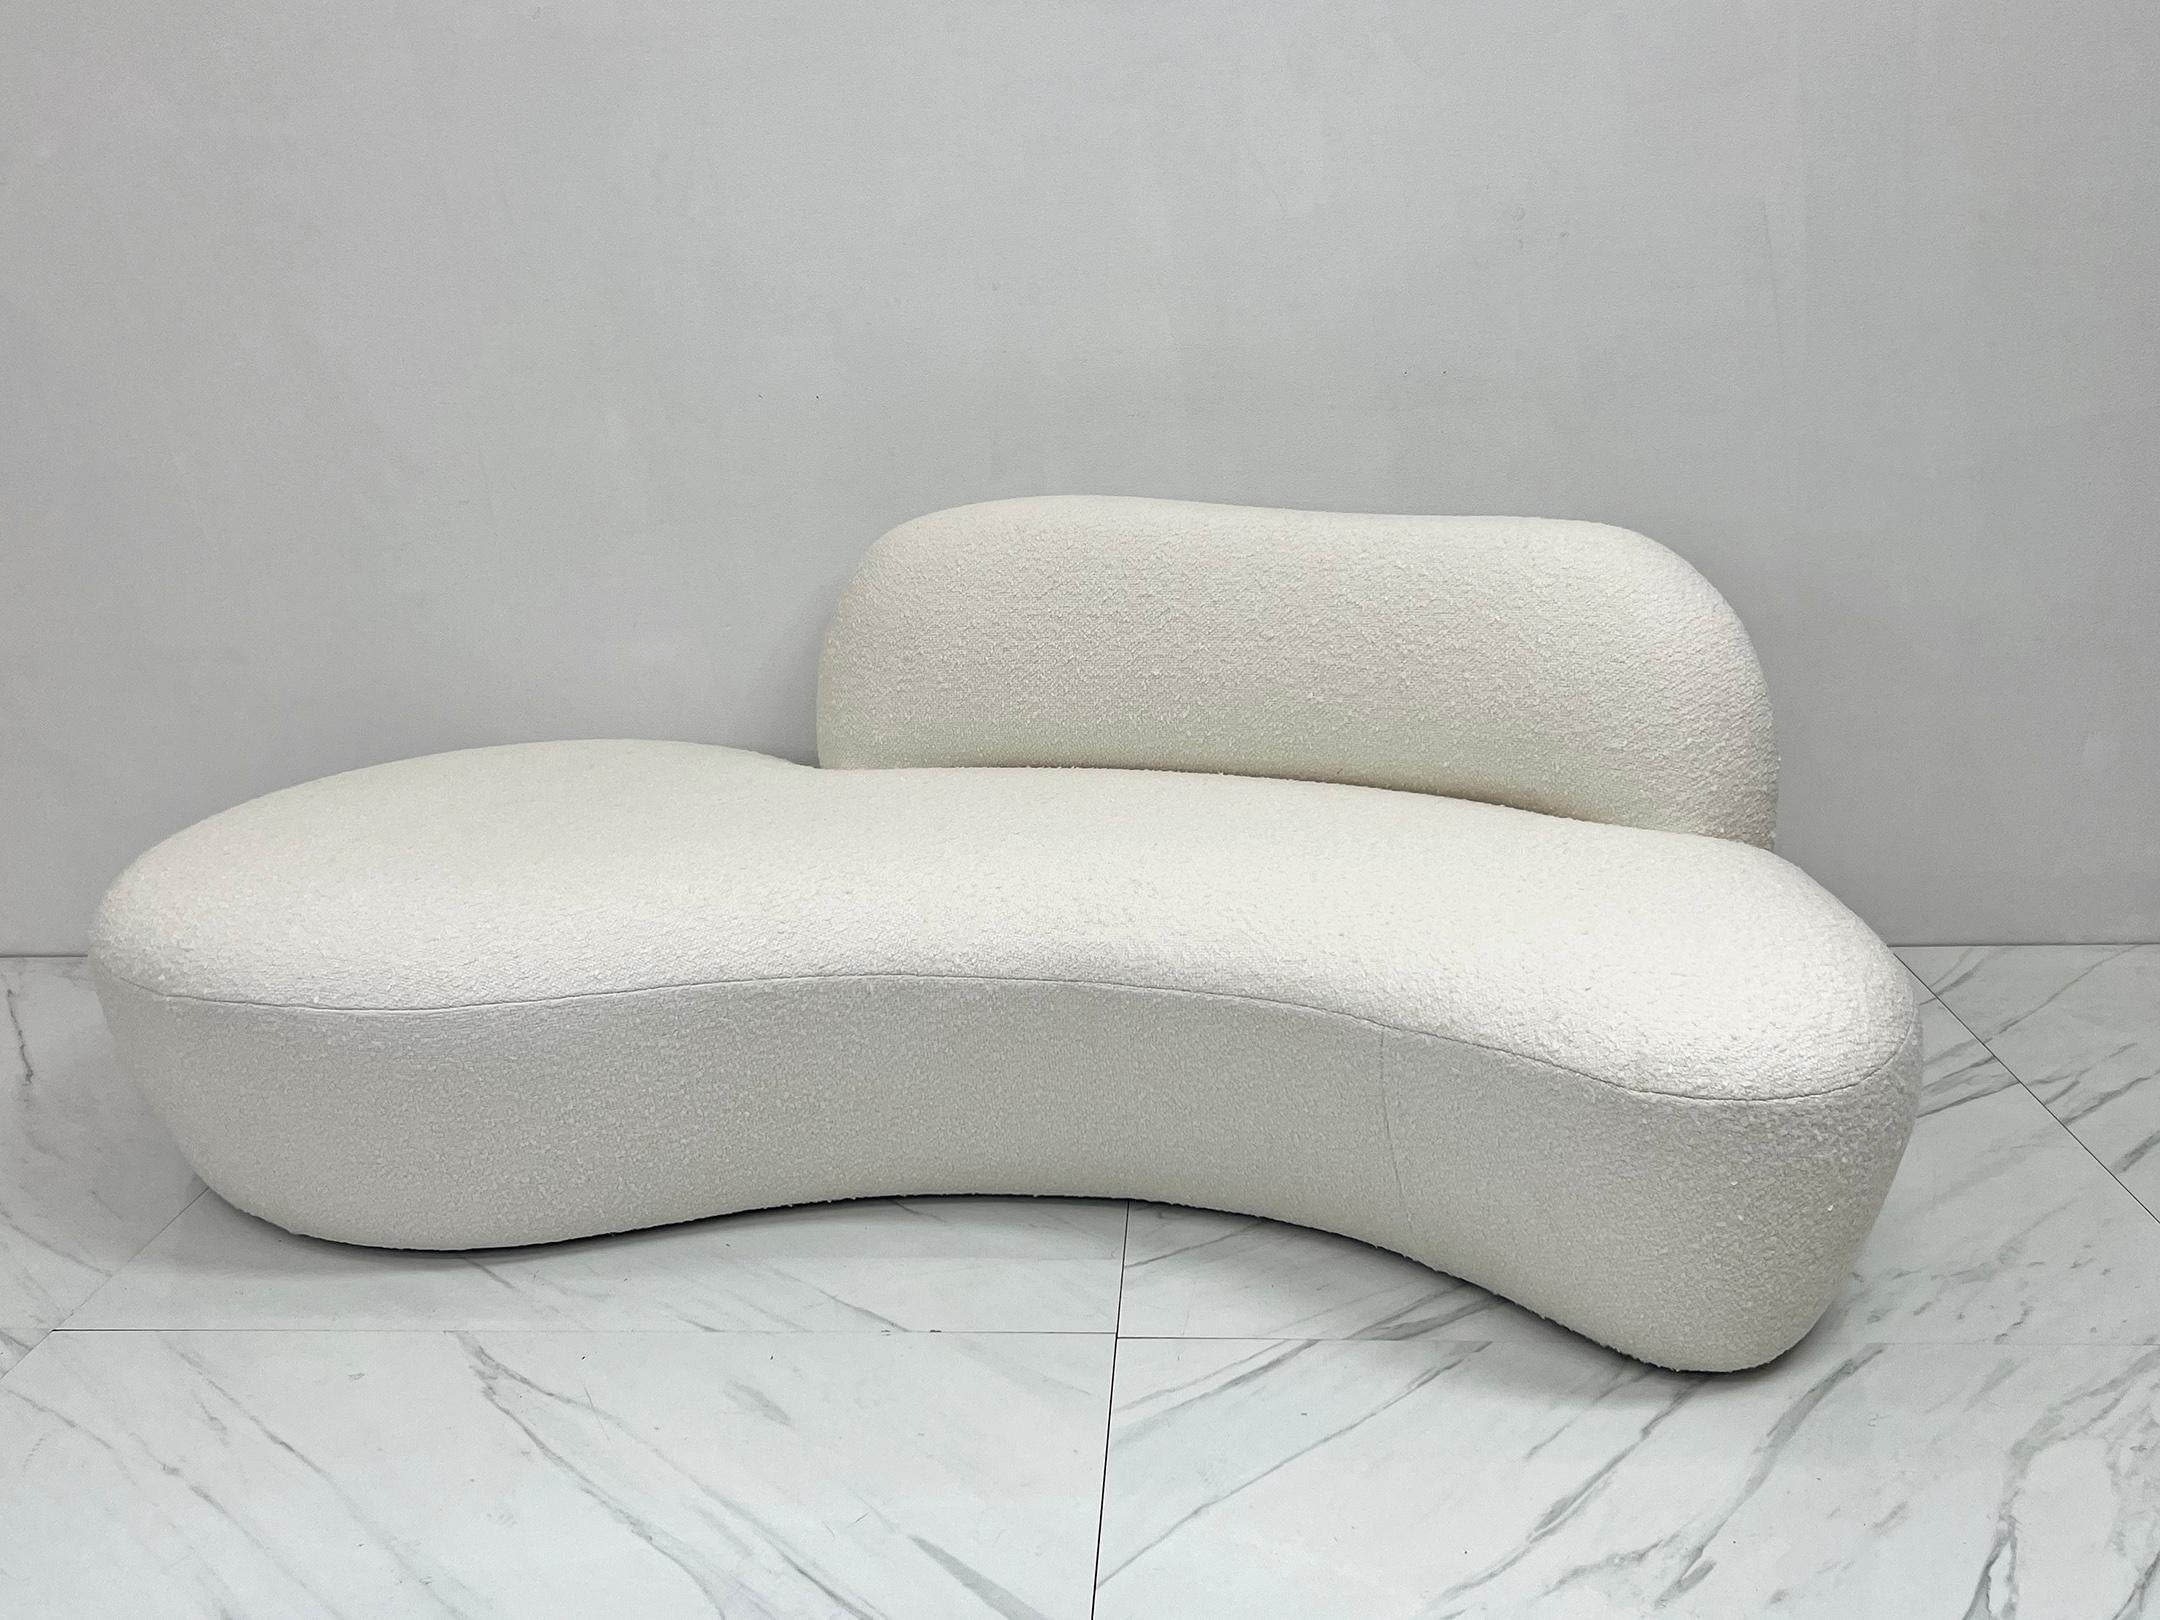 Vladimir Kagan Curved Zoe Sofa in White Boucle for American Leather, Signed 2